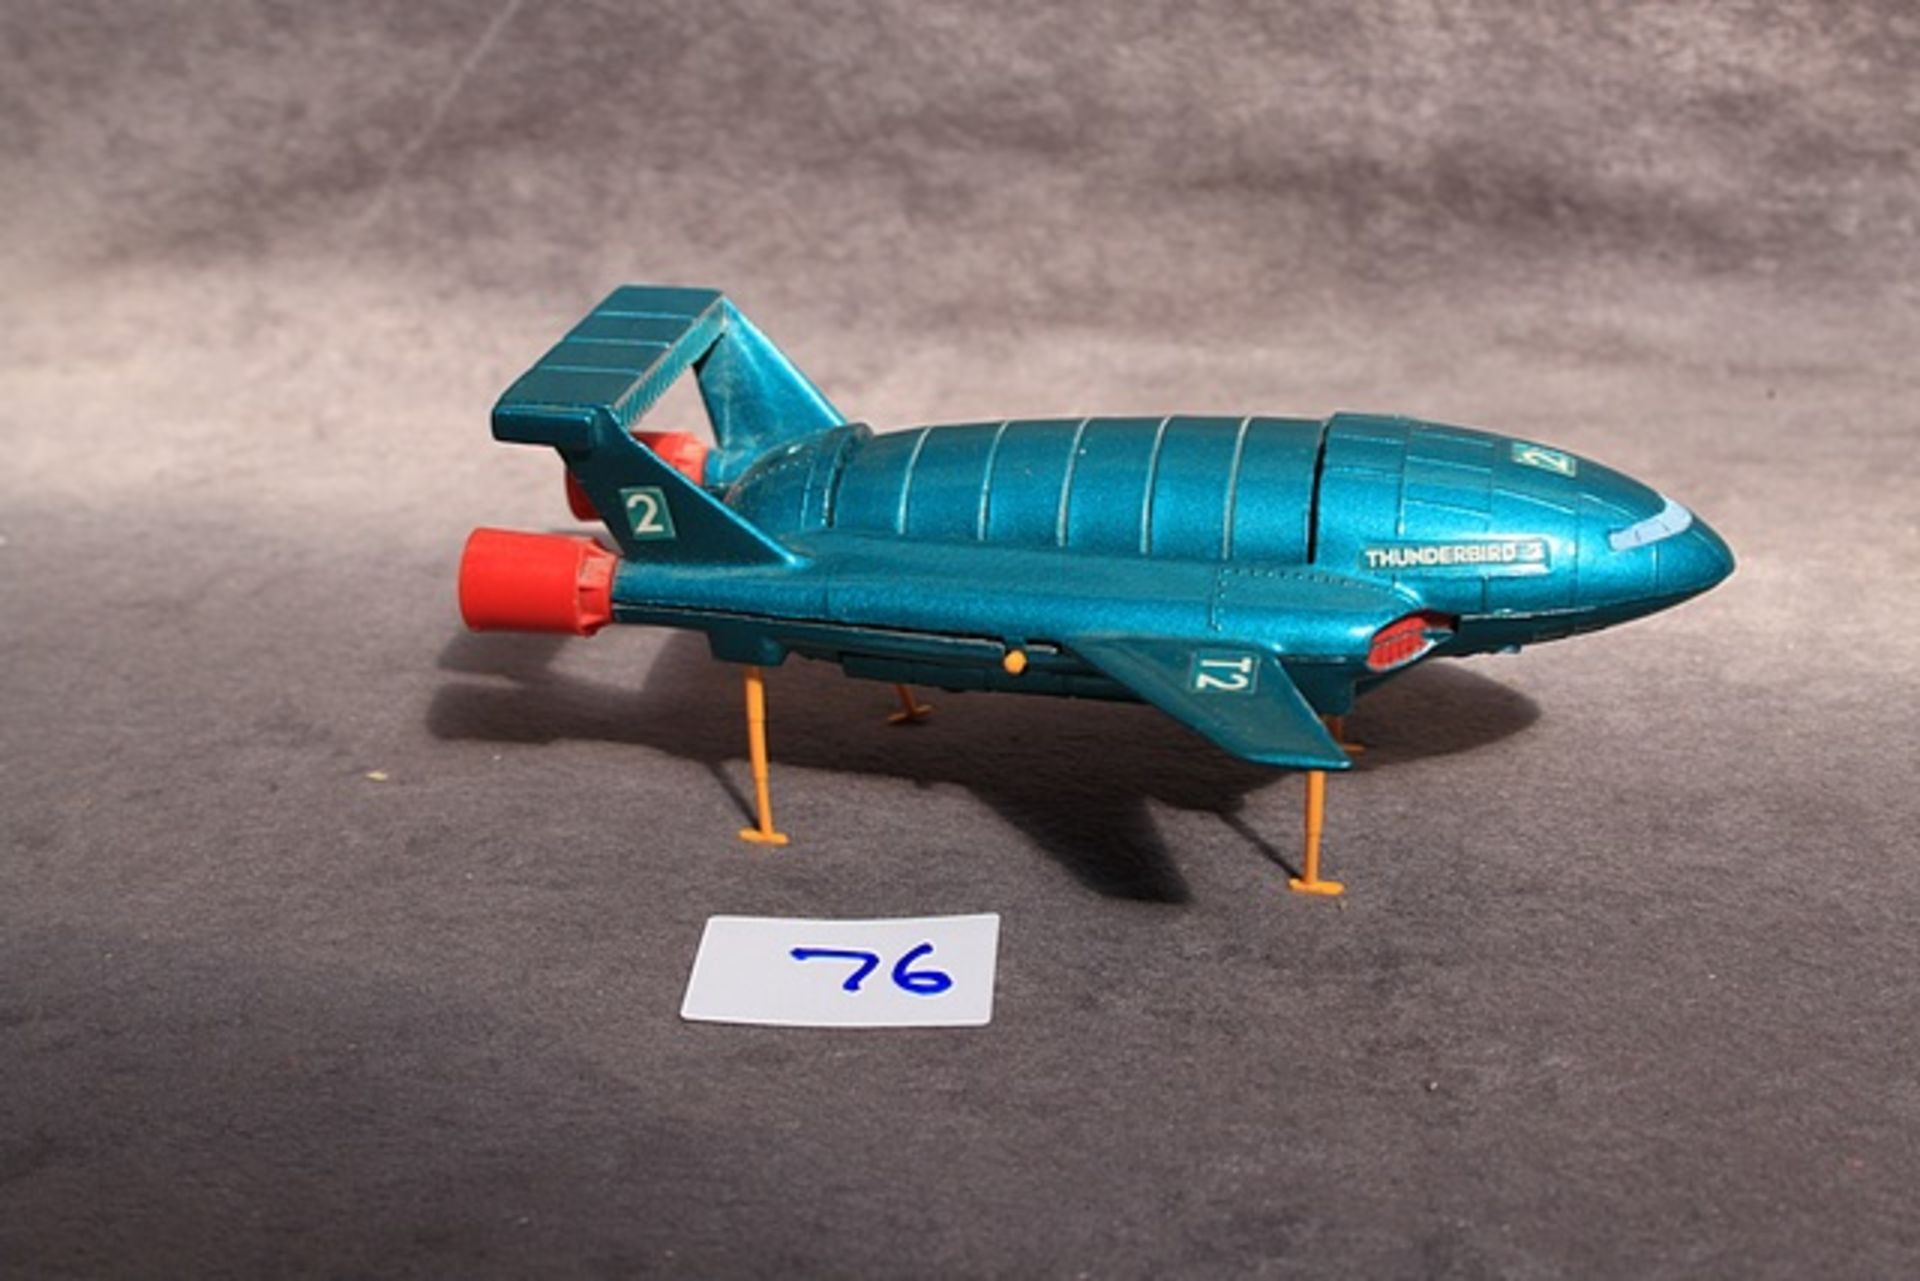 Dinky Diecast #106 Thunderbirds T2 Model All Blue Metal Version with Yellow LegsDinky replaced its